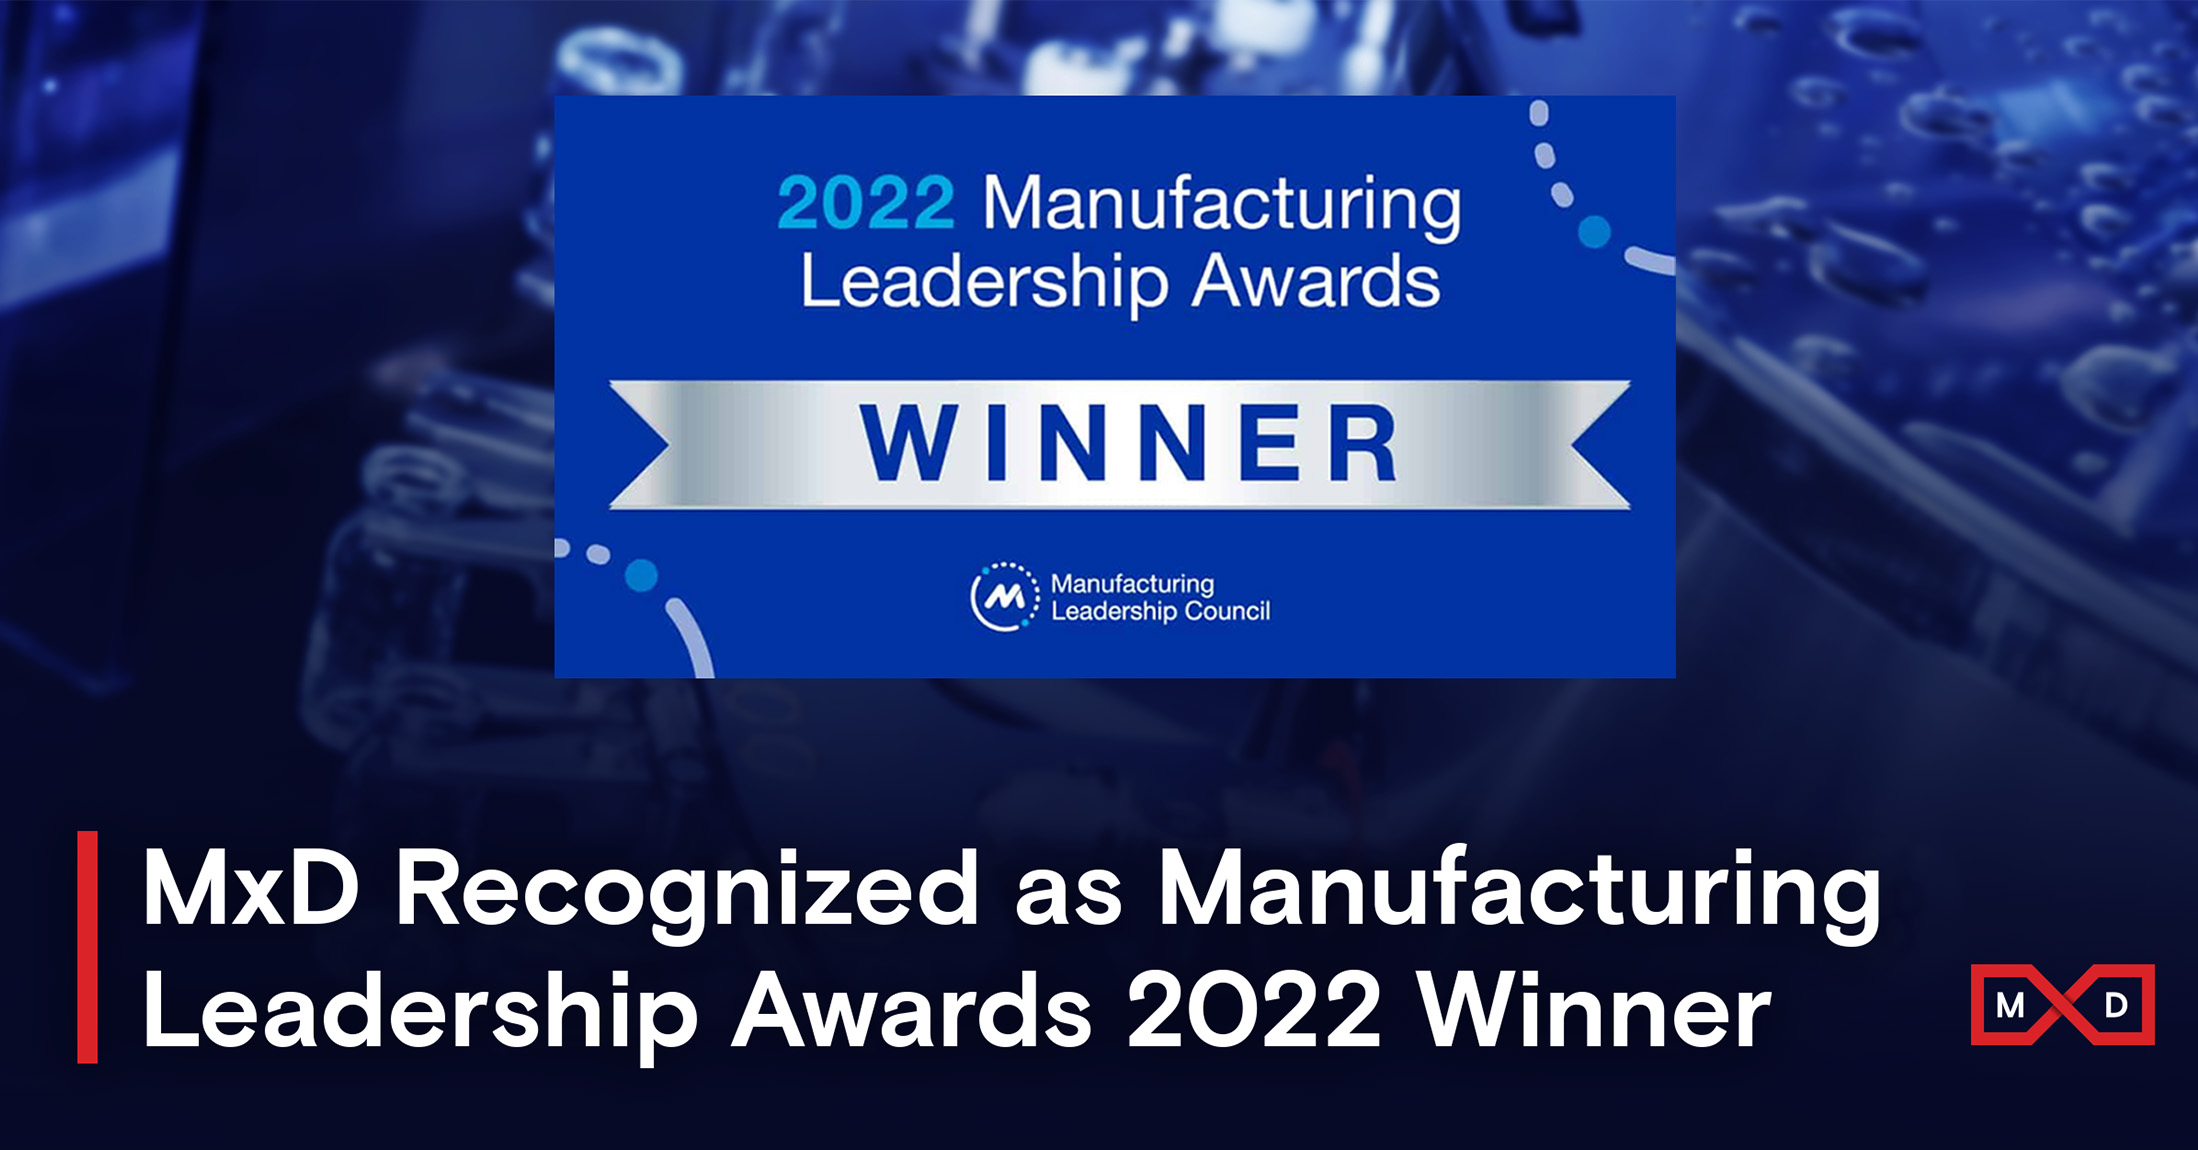 MxD Recognized as Manufacturing Leadership Awards 2022 Winner